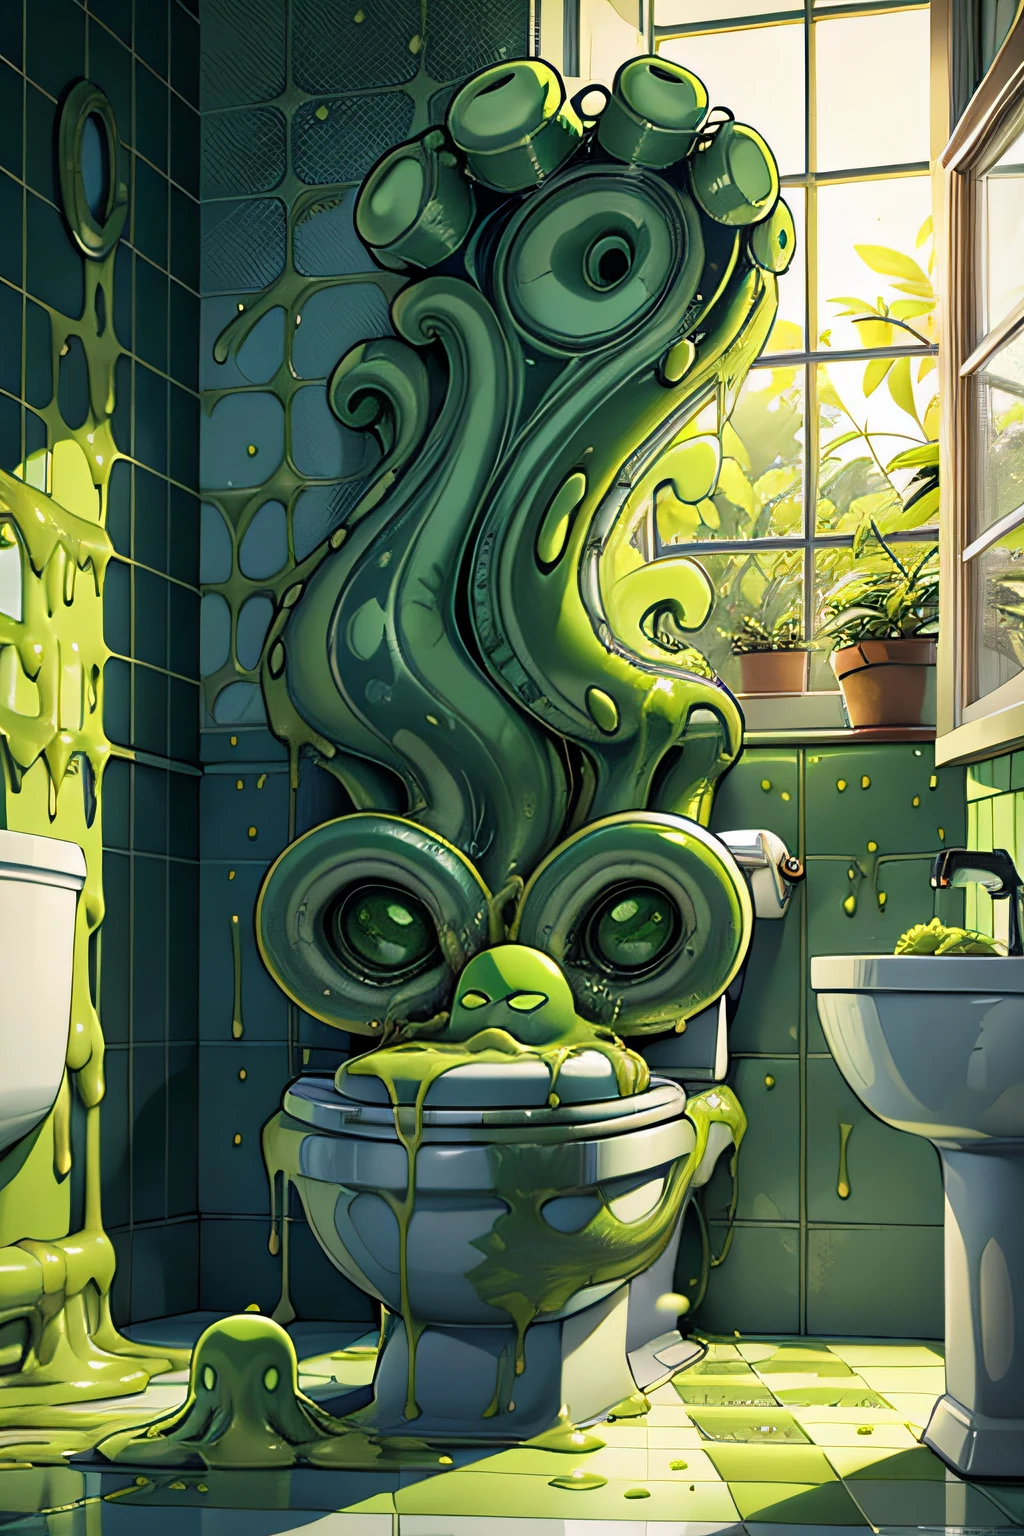 green slime alien blob with tentacles,invasion of green slime alien blobs popping out of the toilet,background:small bathroom,1toilet,1window,checkerboard floor,mess,newspapers,(green slime blasts),